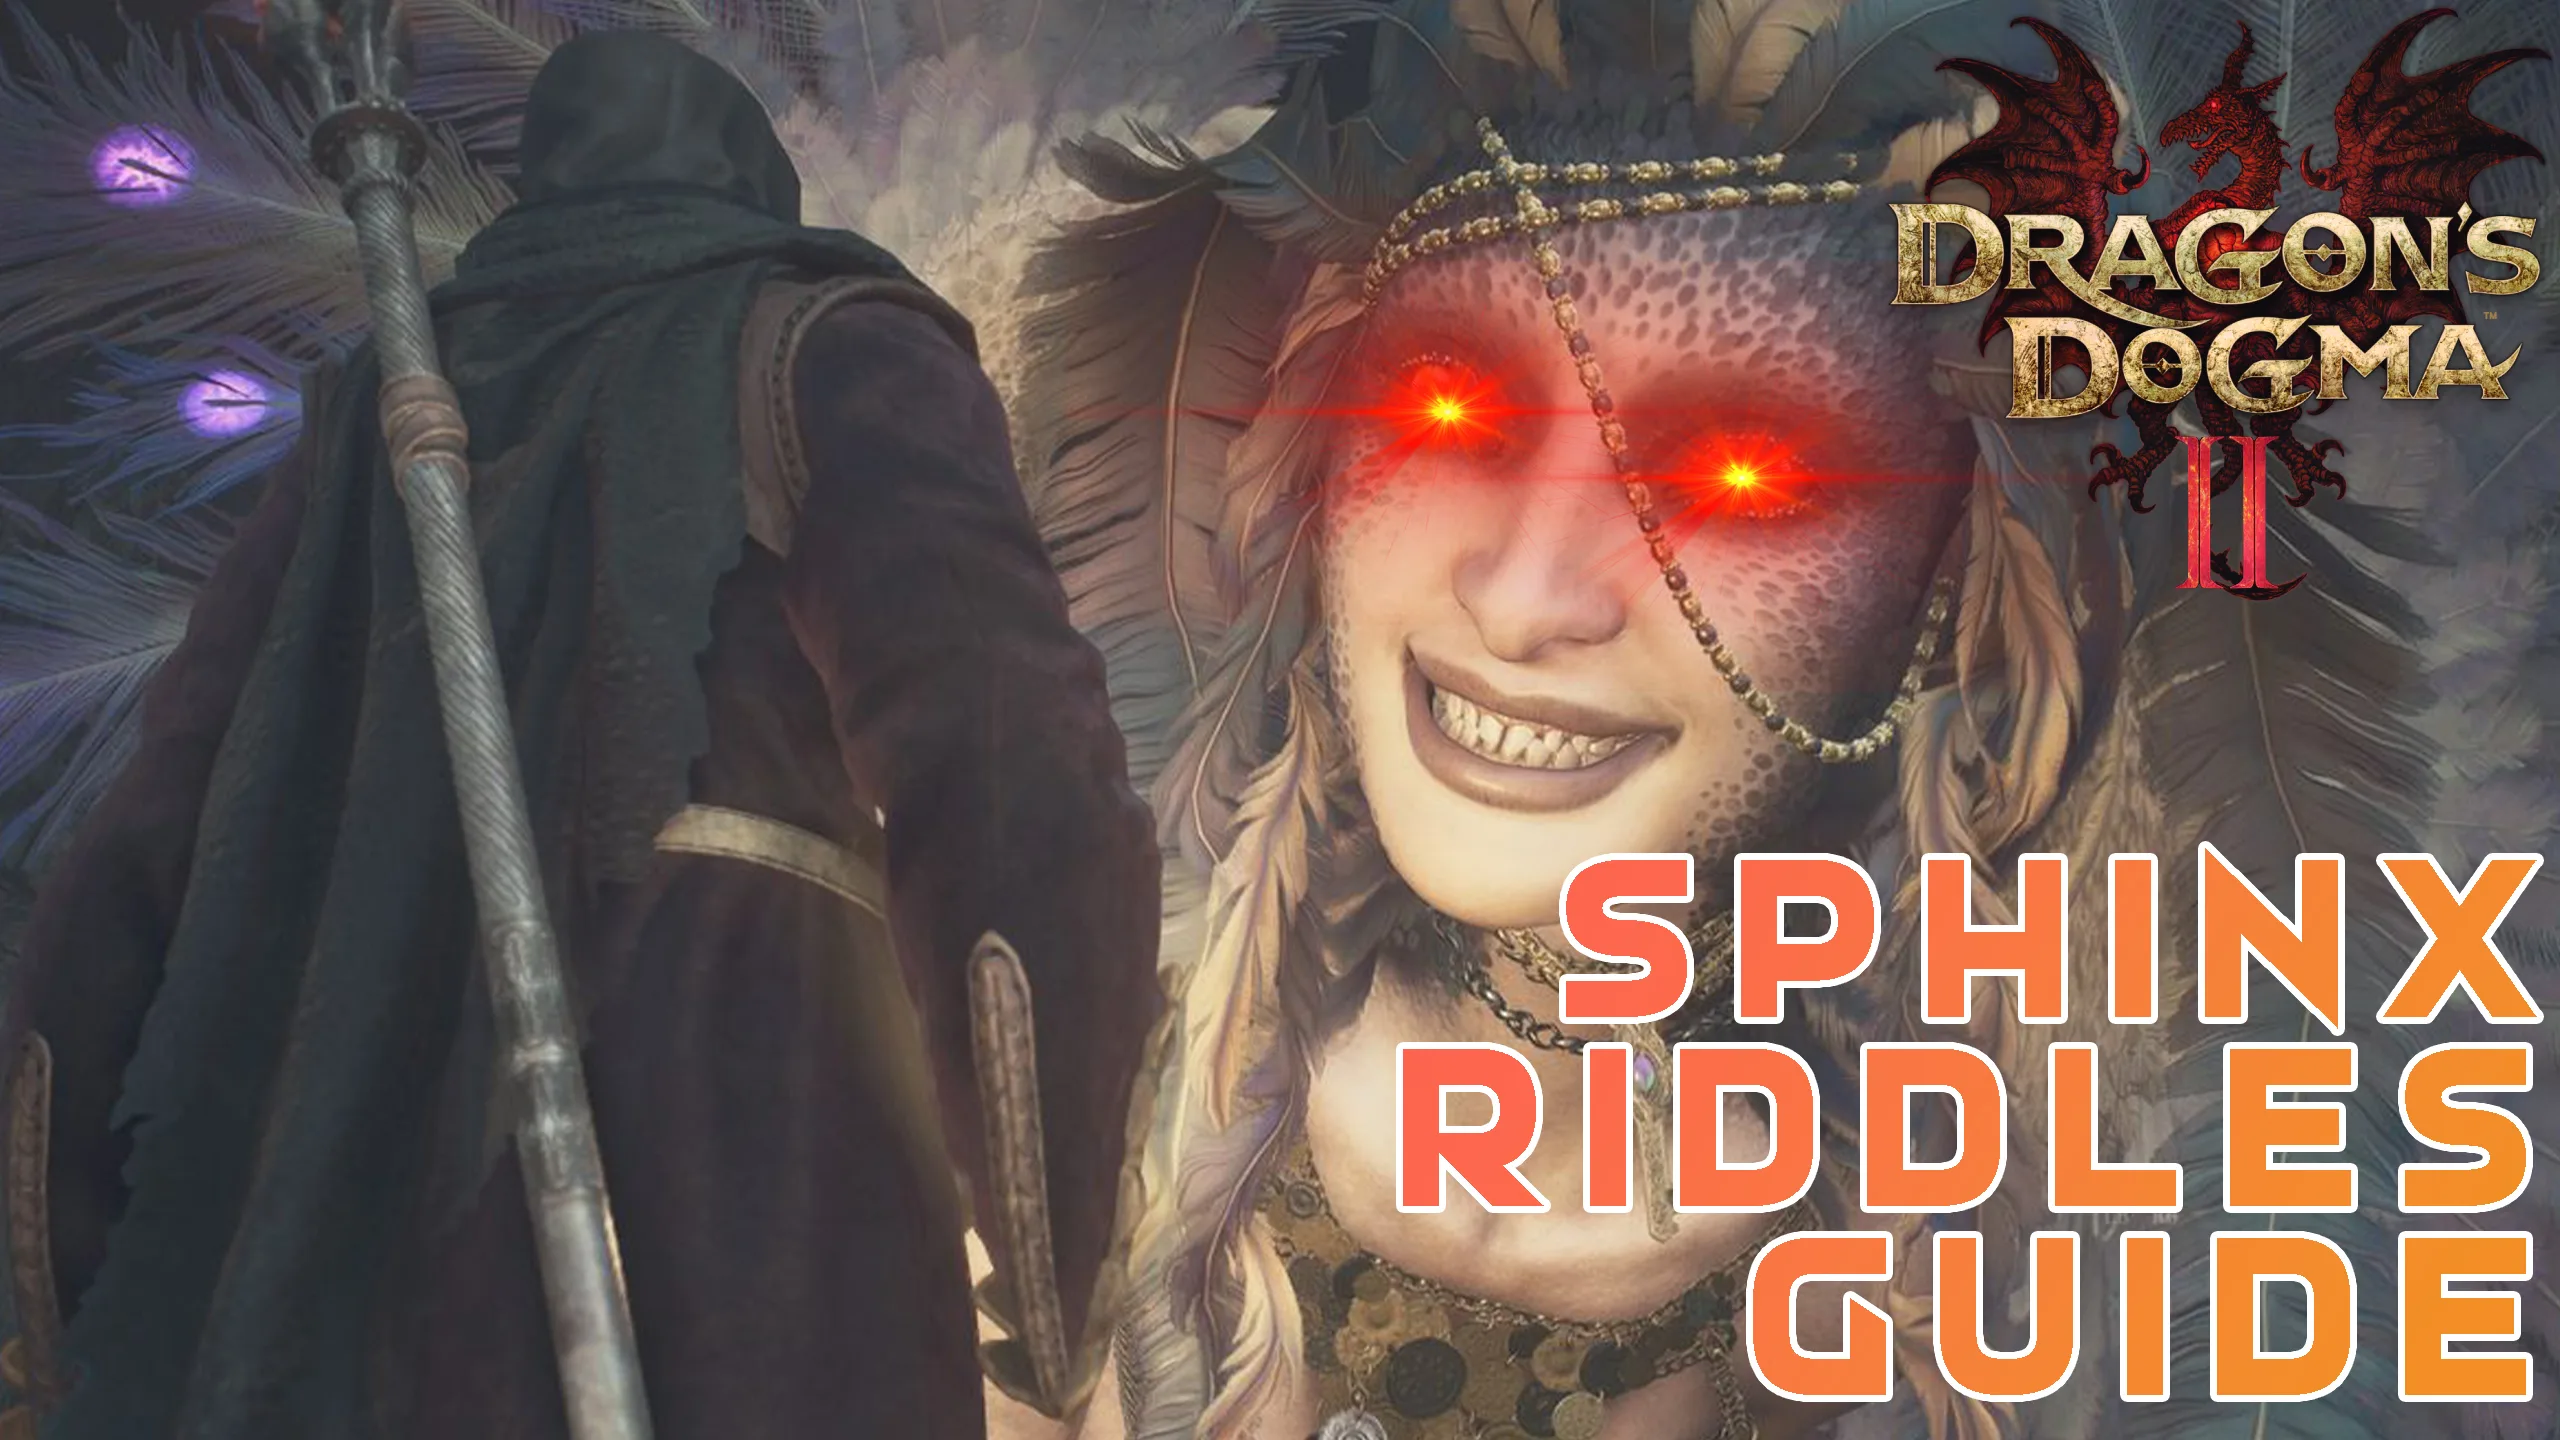 Sphinx-Riddles-guide-Dragon's-Dogma 2